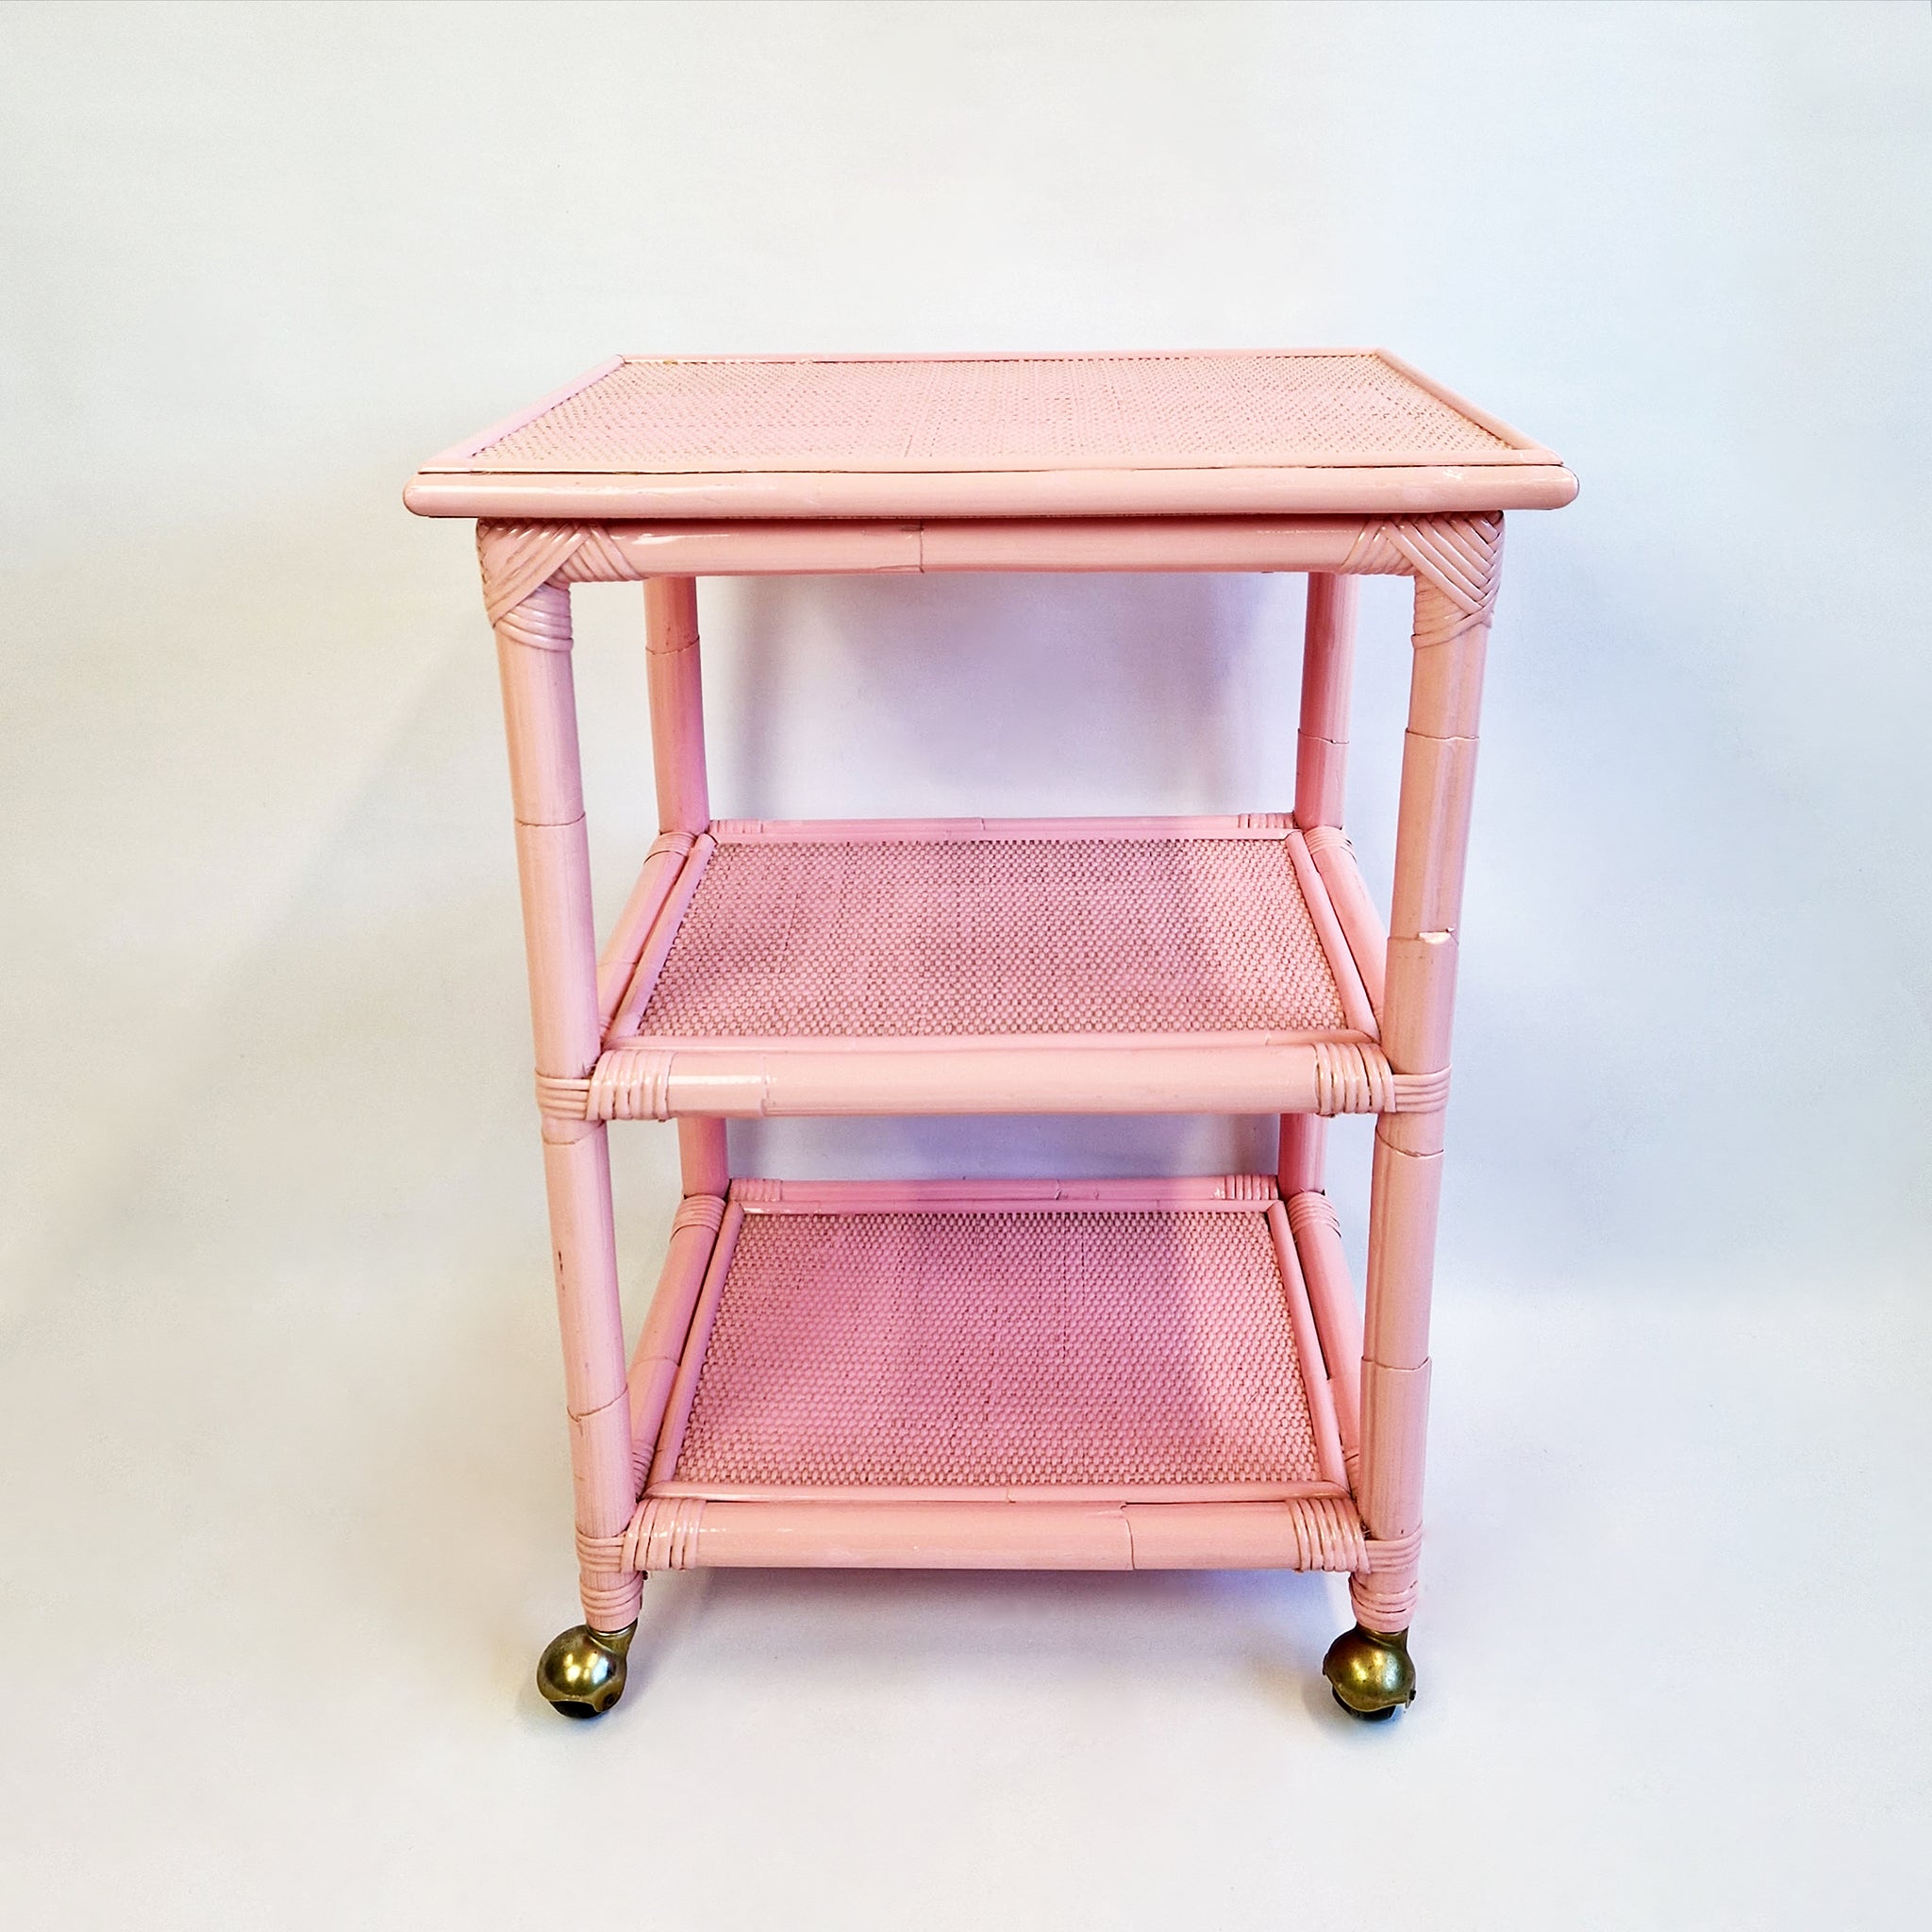 Vintage Italian side table with wheels in pink bamboo and rattan